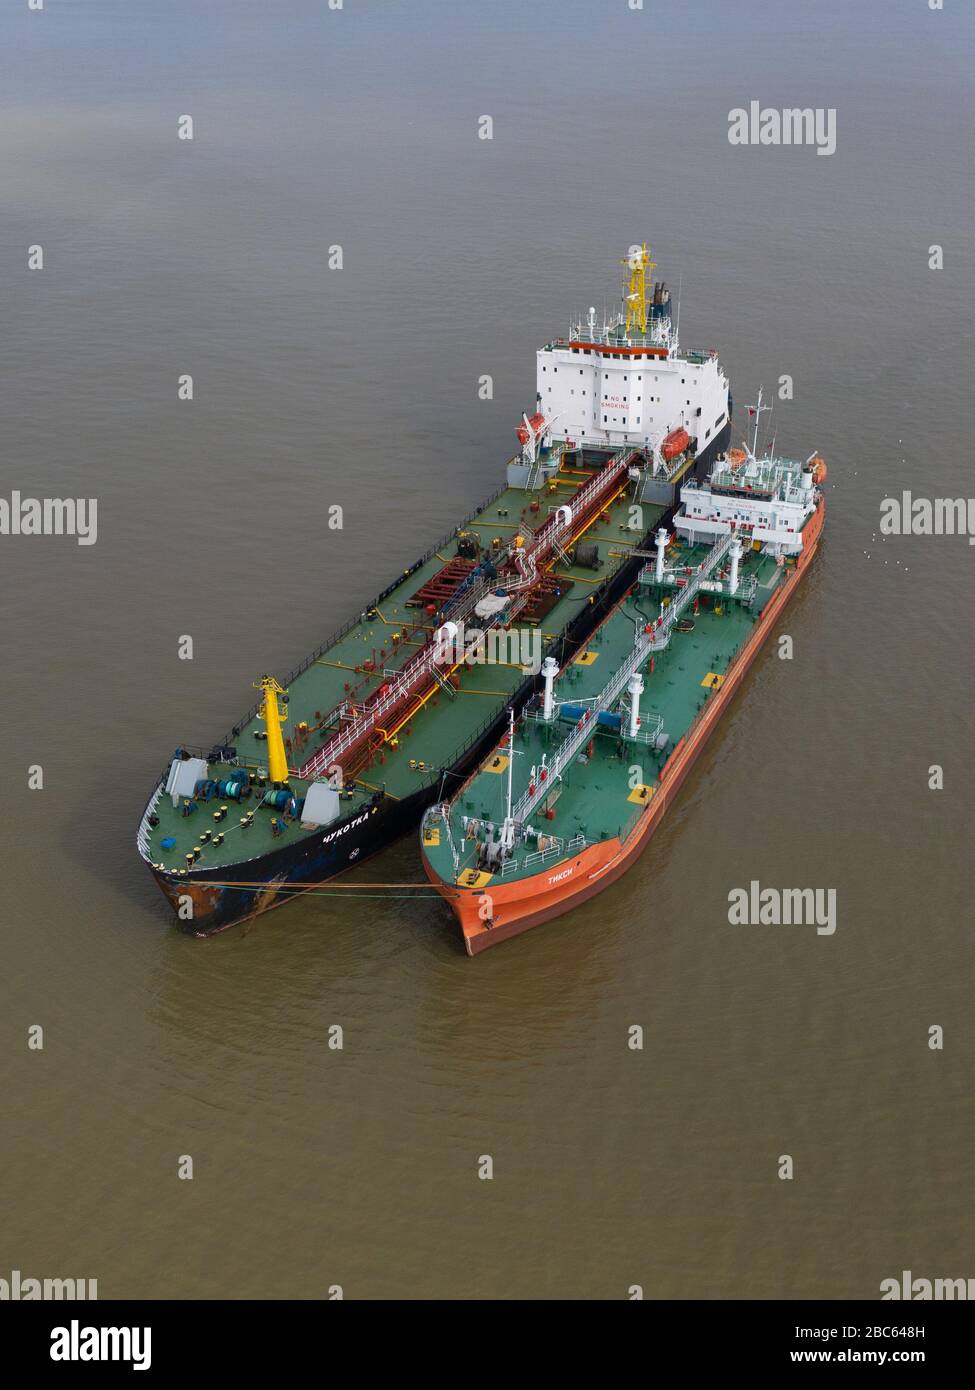 Ayon, Chukotski region, Russia - September 2, 2019: The top view on the Chukotka+ and Tiksi tankers on mooring. Shooting from above drone. Stock Photo